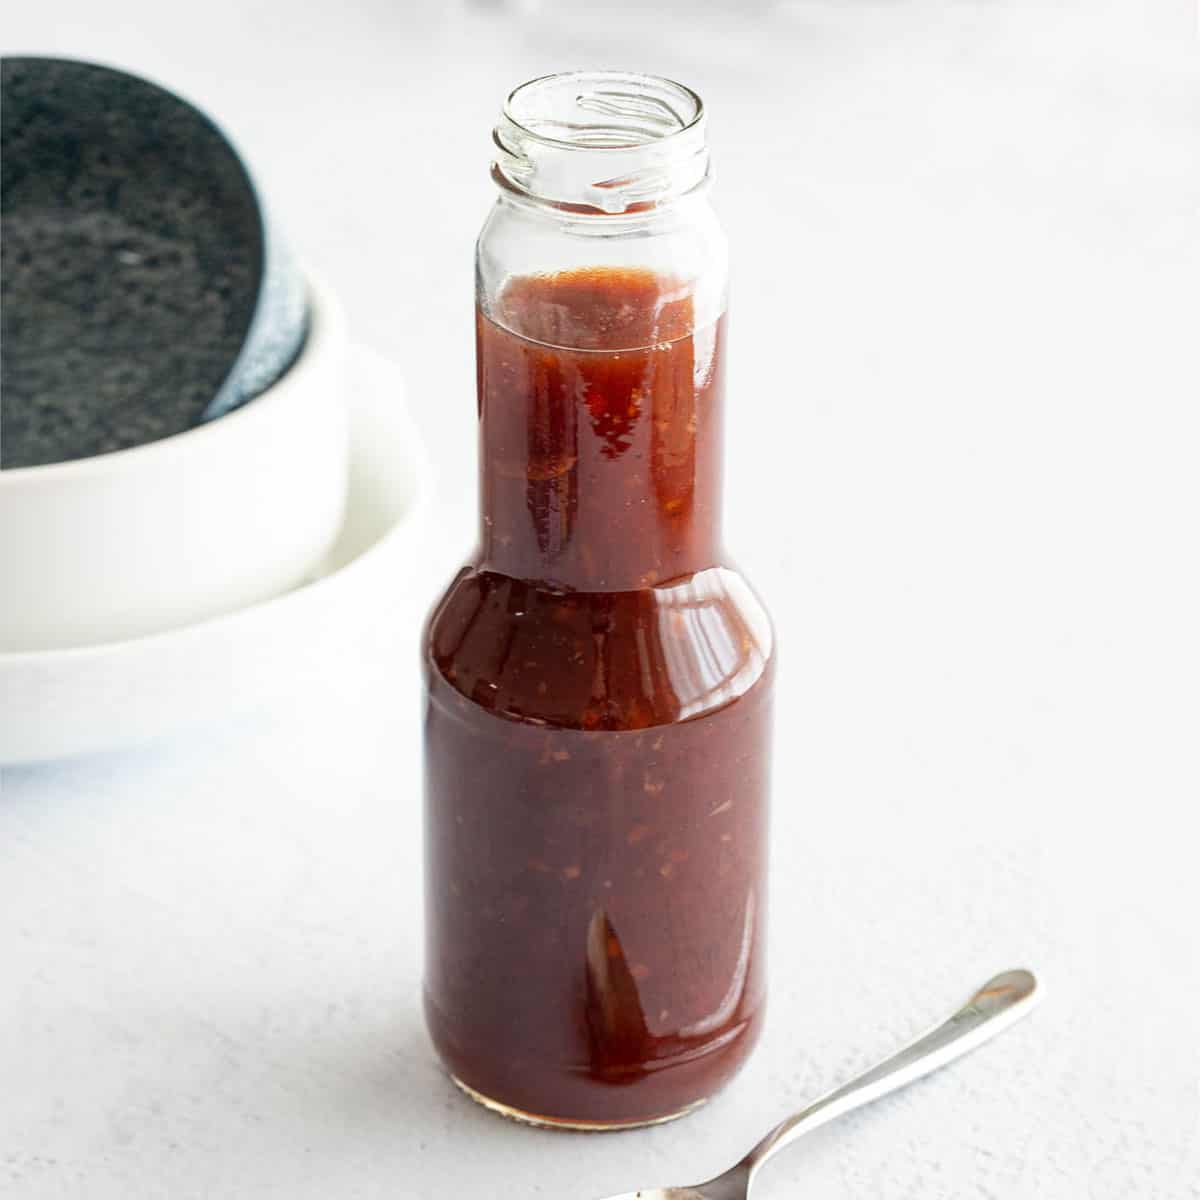 Bottle of Worcestershire sauce with spoon and bowls in background.